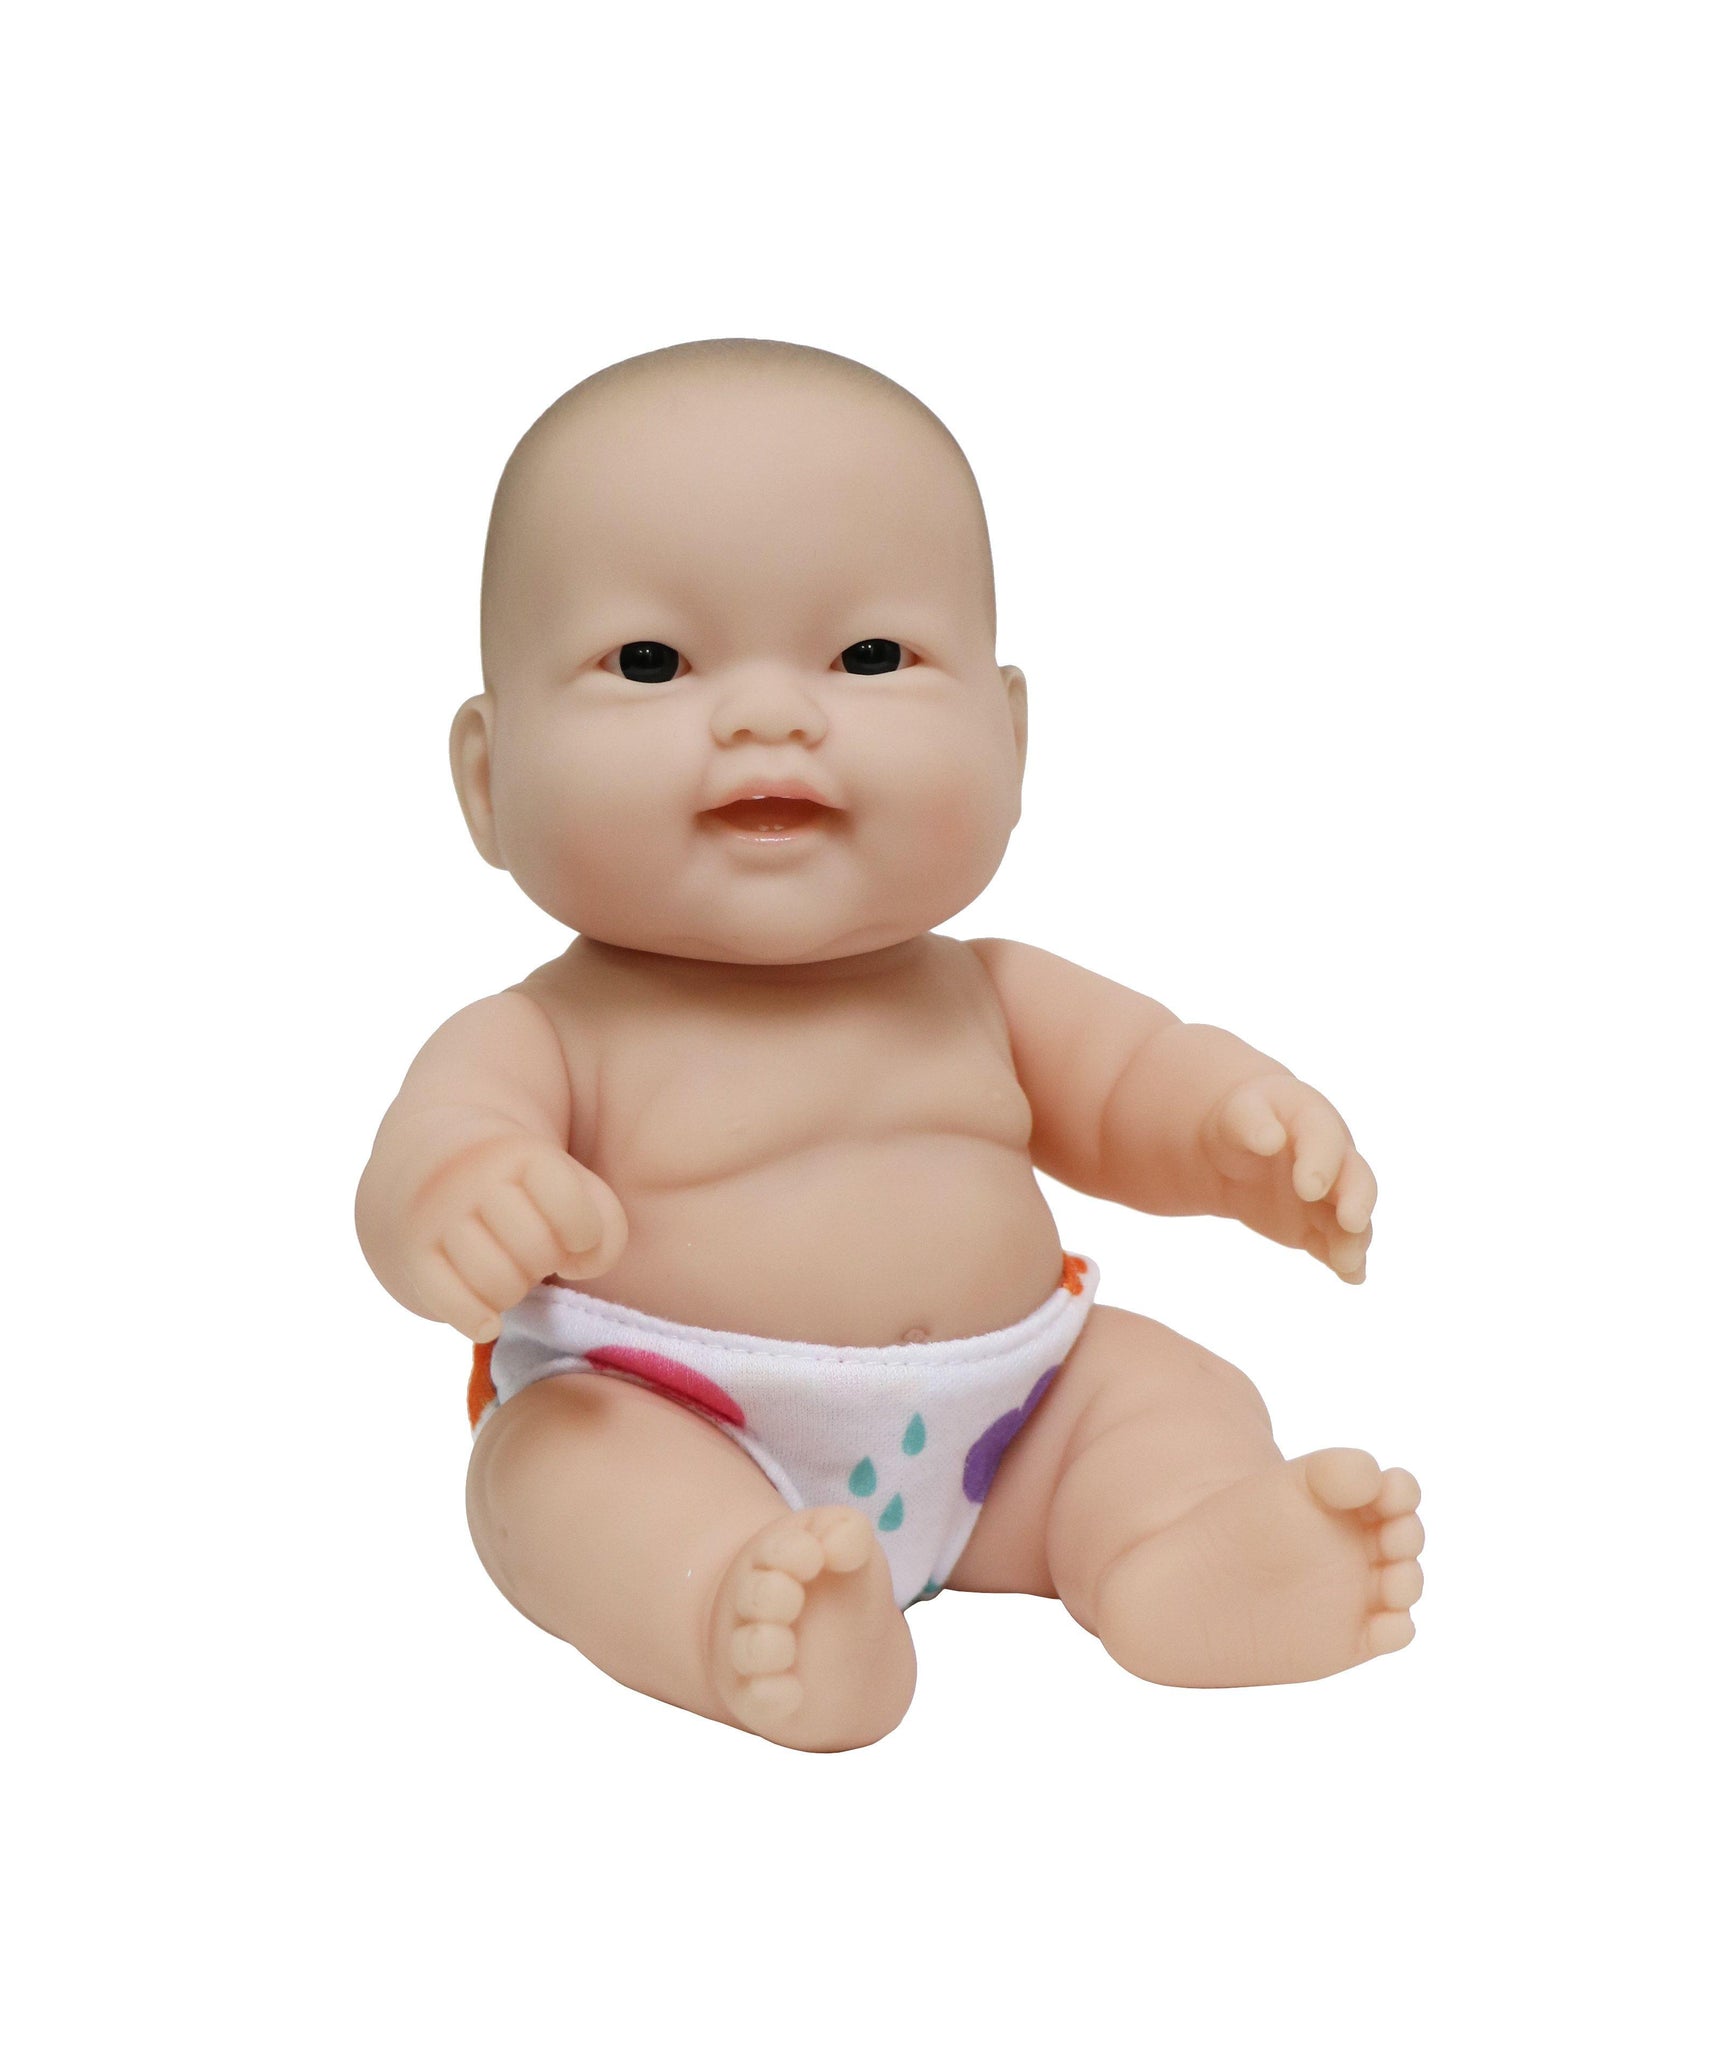 Lots to Love Babies 10" Asian All Vinyl Doll Assortment - PDQ - JC Toys Group Inc.